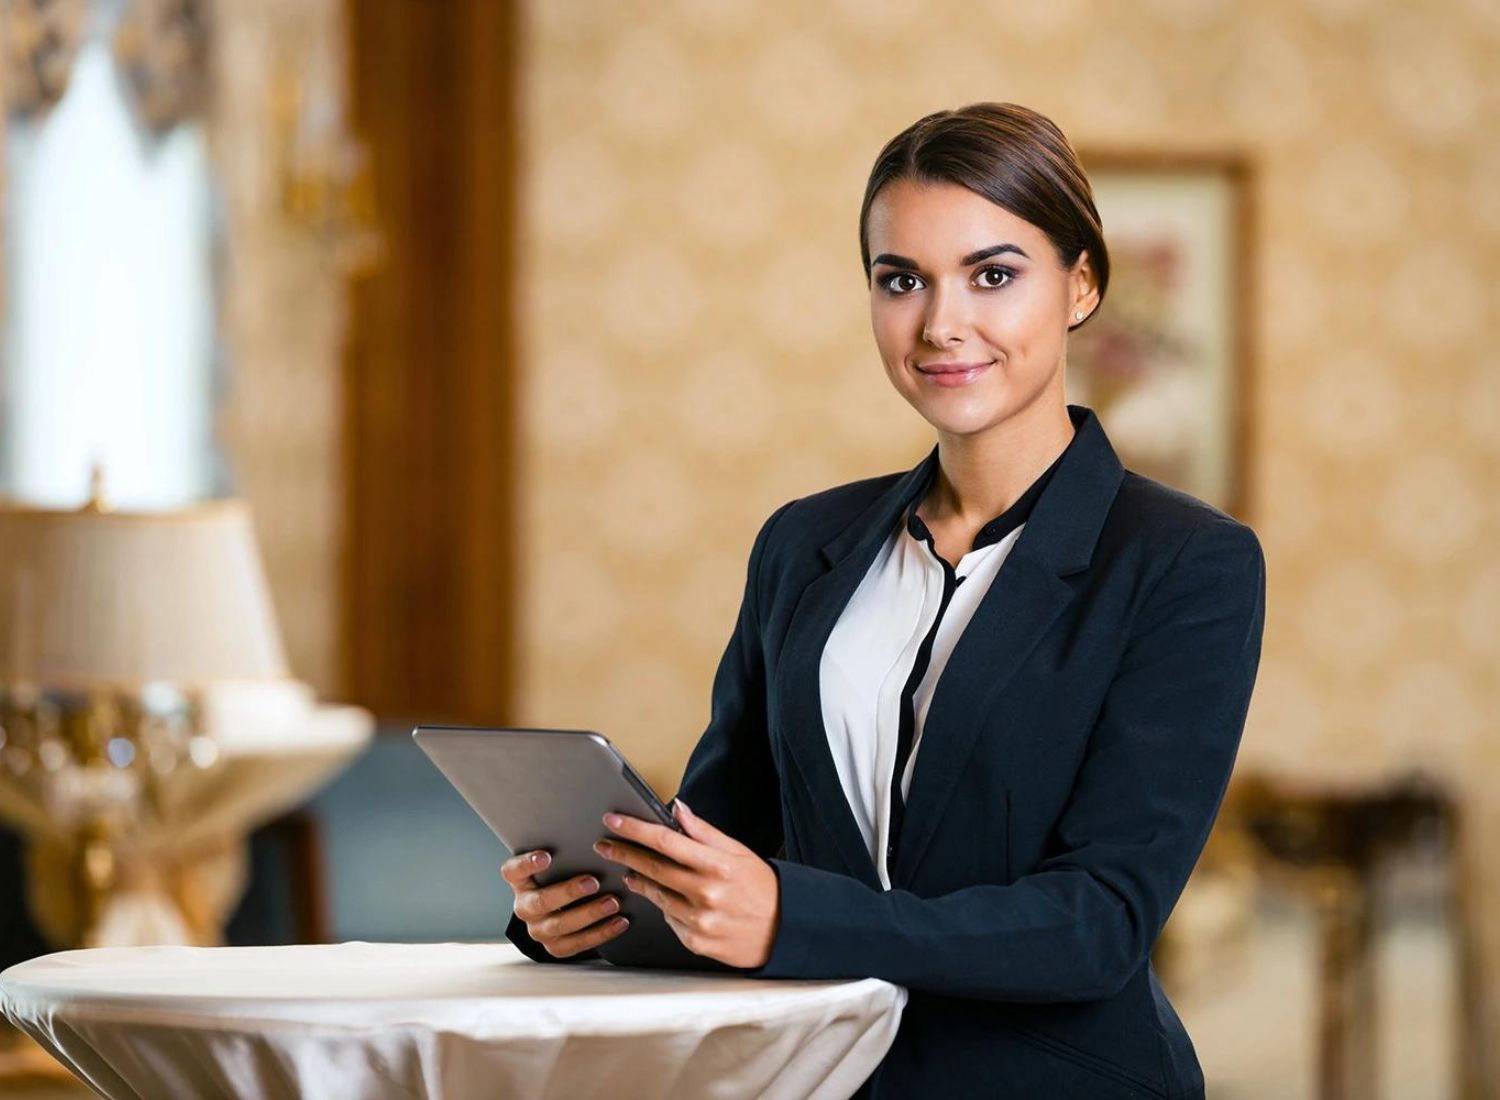 Why Should One Pursue A Career In Hospitality Industry